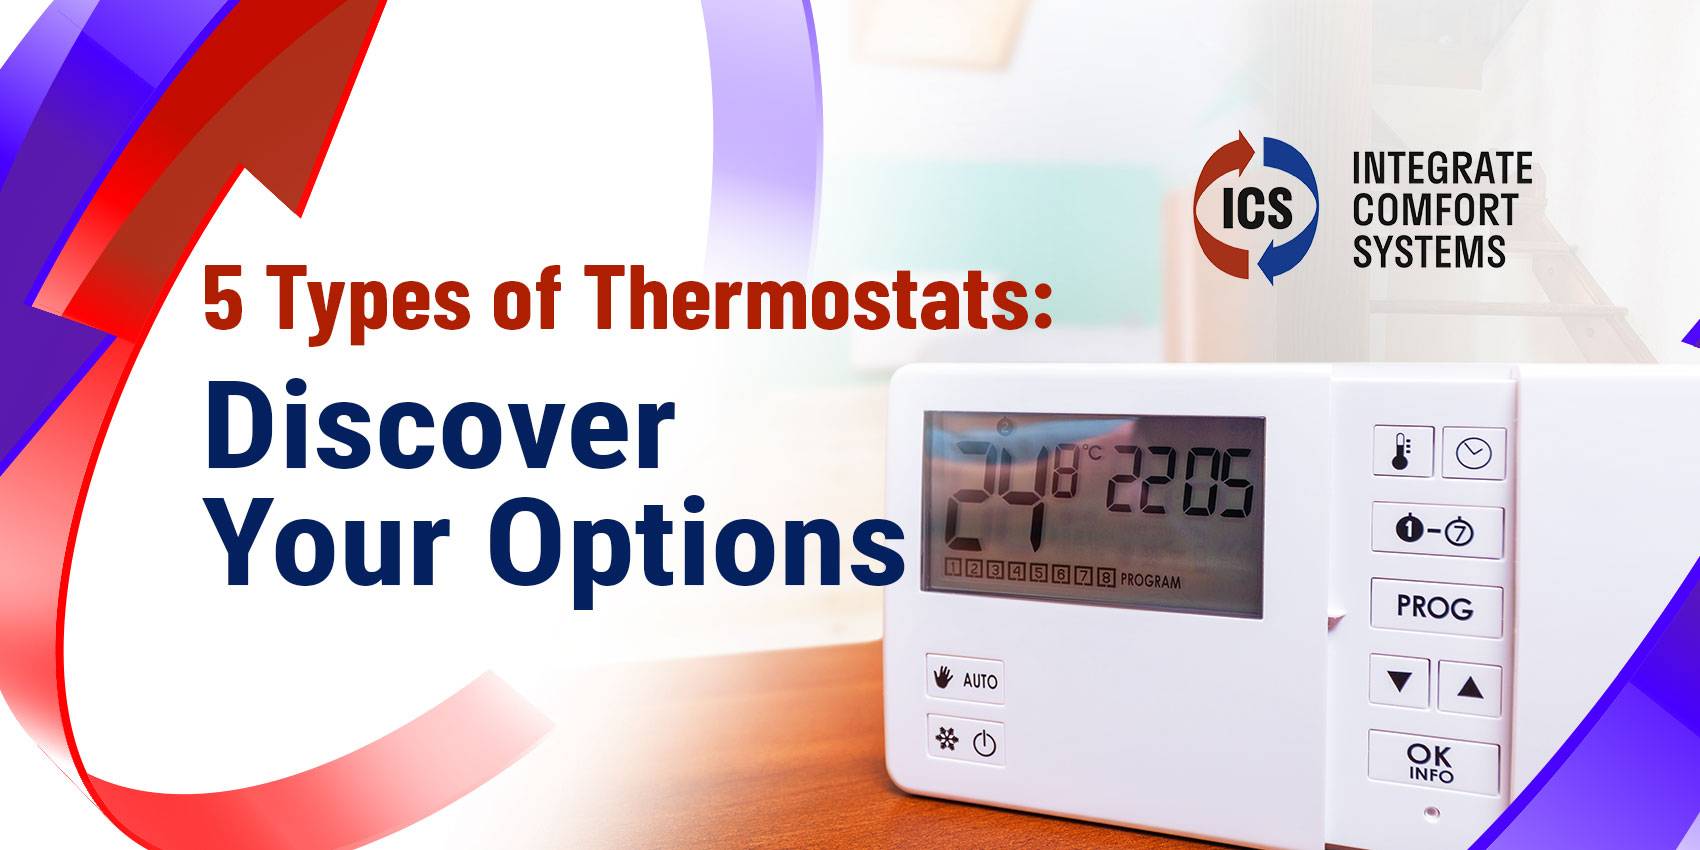 5 Types of Thermostats: Discover Your Options